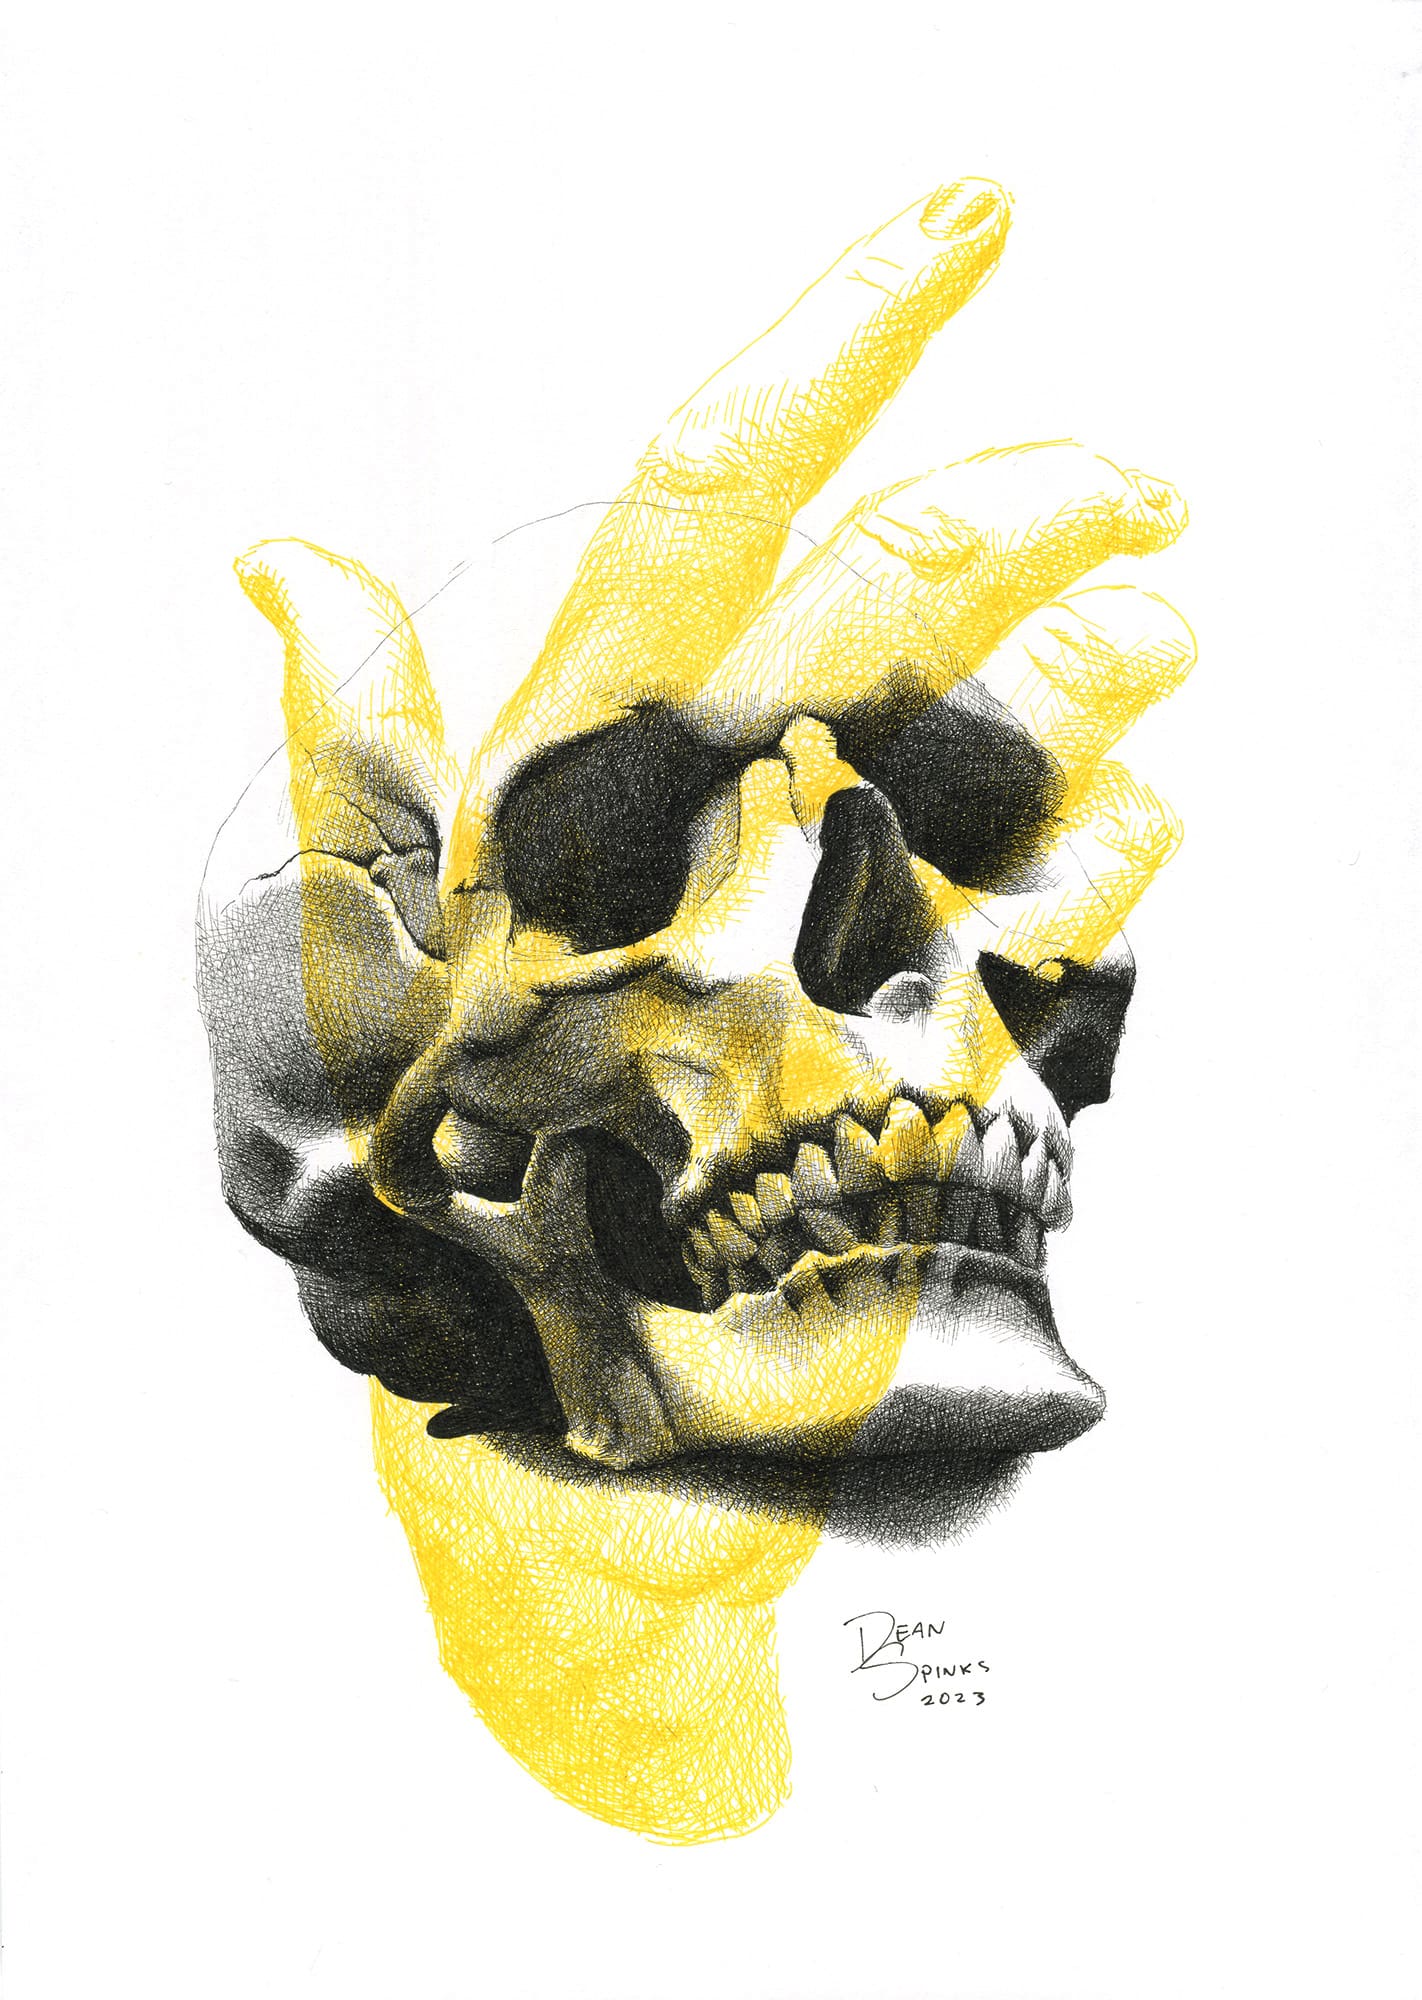 photorealistic skull and hand drawn with copic marker